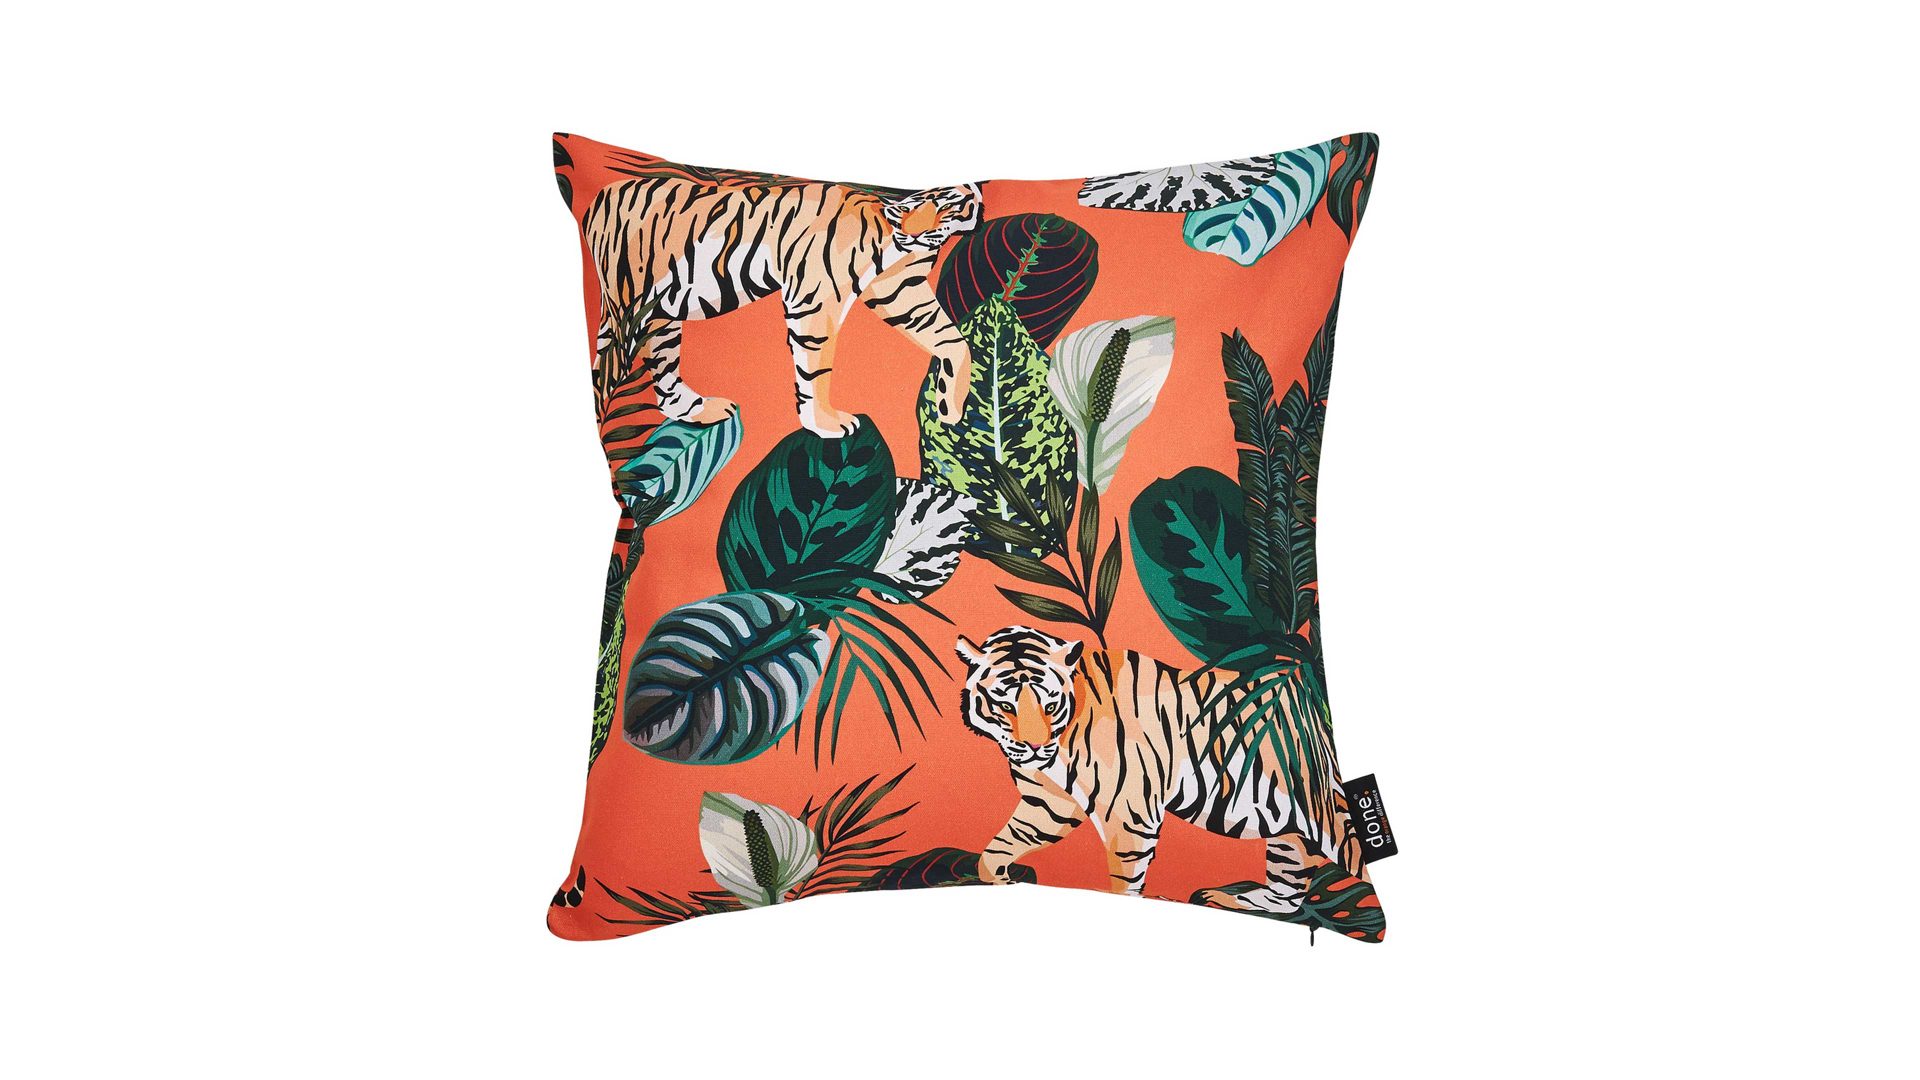 Kissenbezug /-hülle Done.® be different aus Stoff in Mehrfarbig DONE.® Kissehülle Cushion Panama Print Dessin Tiger – ca. 45 x 45 cm